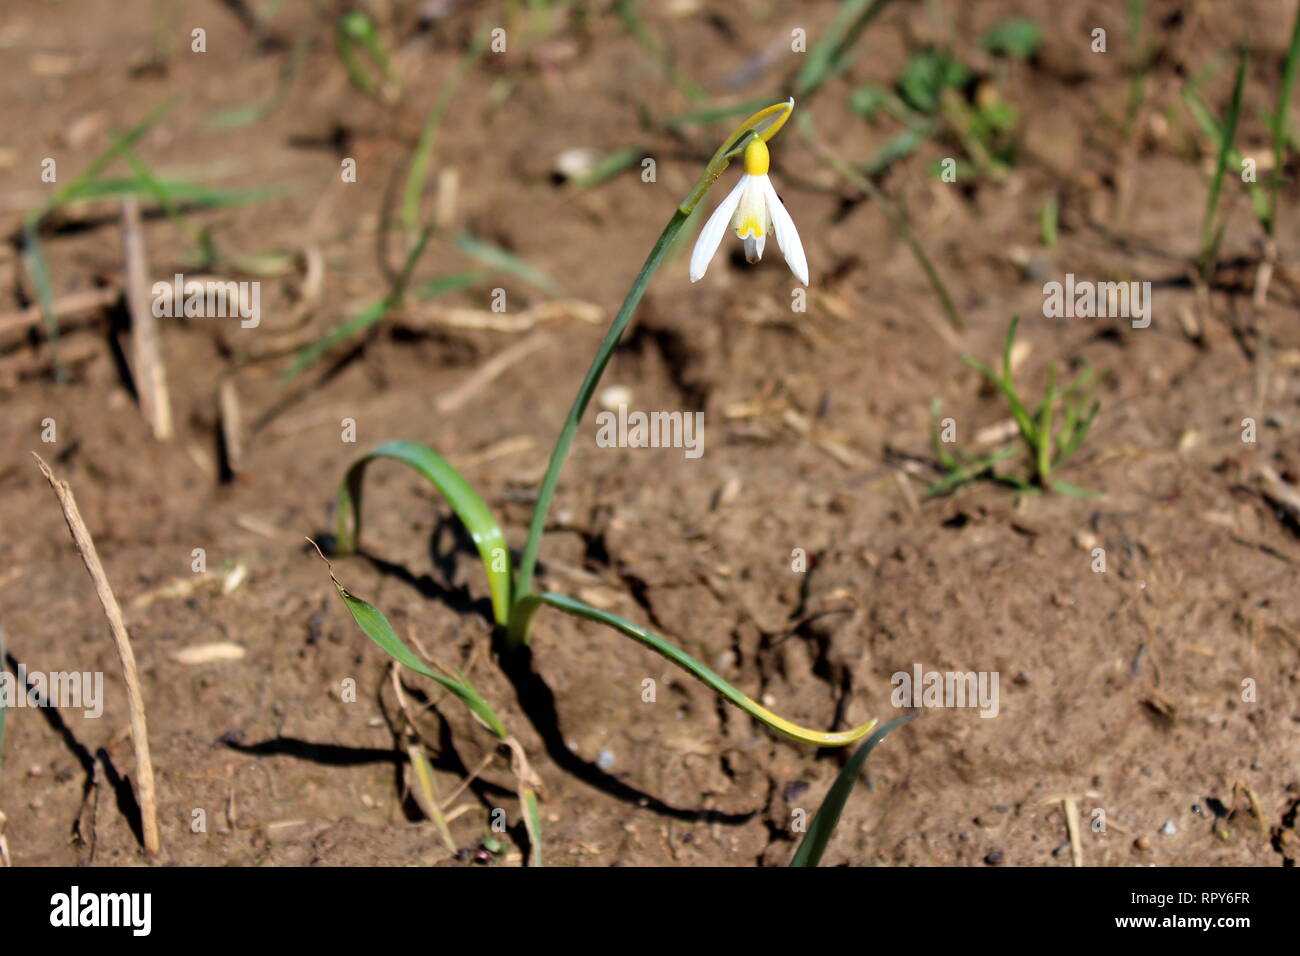 Snowdrop or Galanthus bulbous perennial herbaceous plant with two linear leaves and a single small white drooping bell shaped flower with six petals Stock Photo